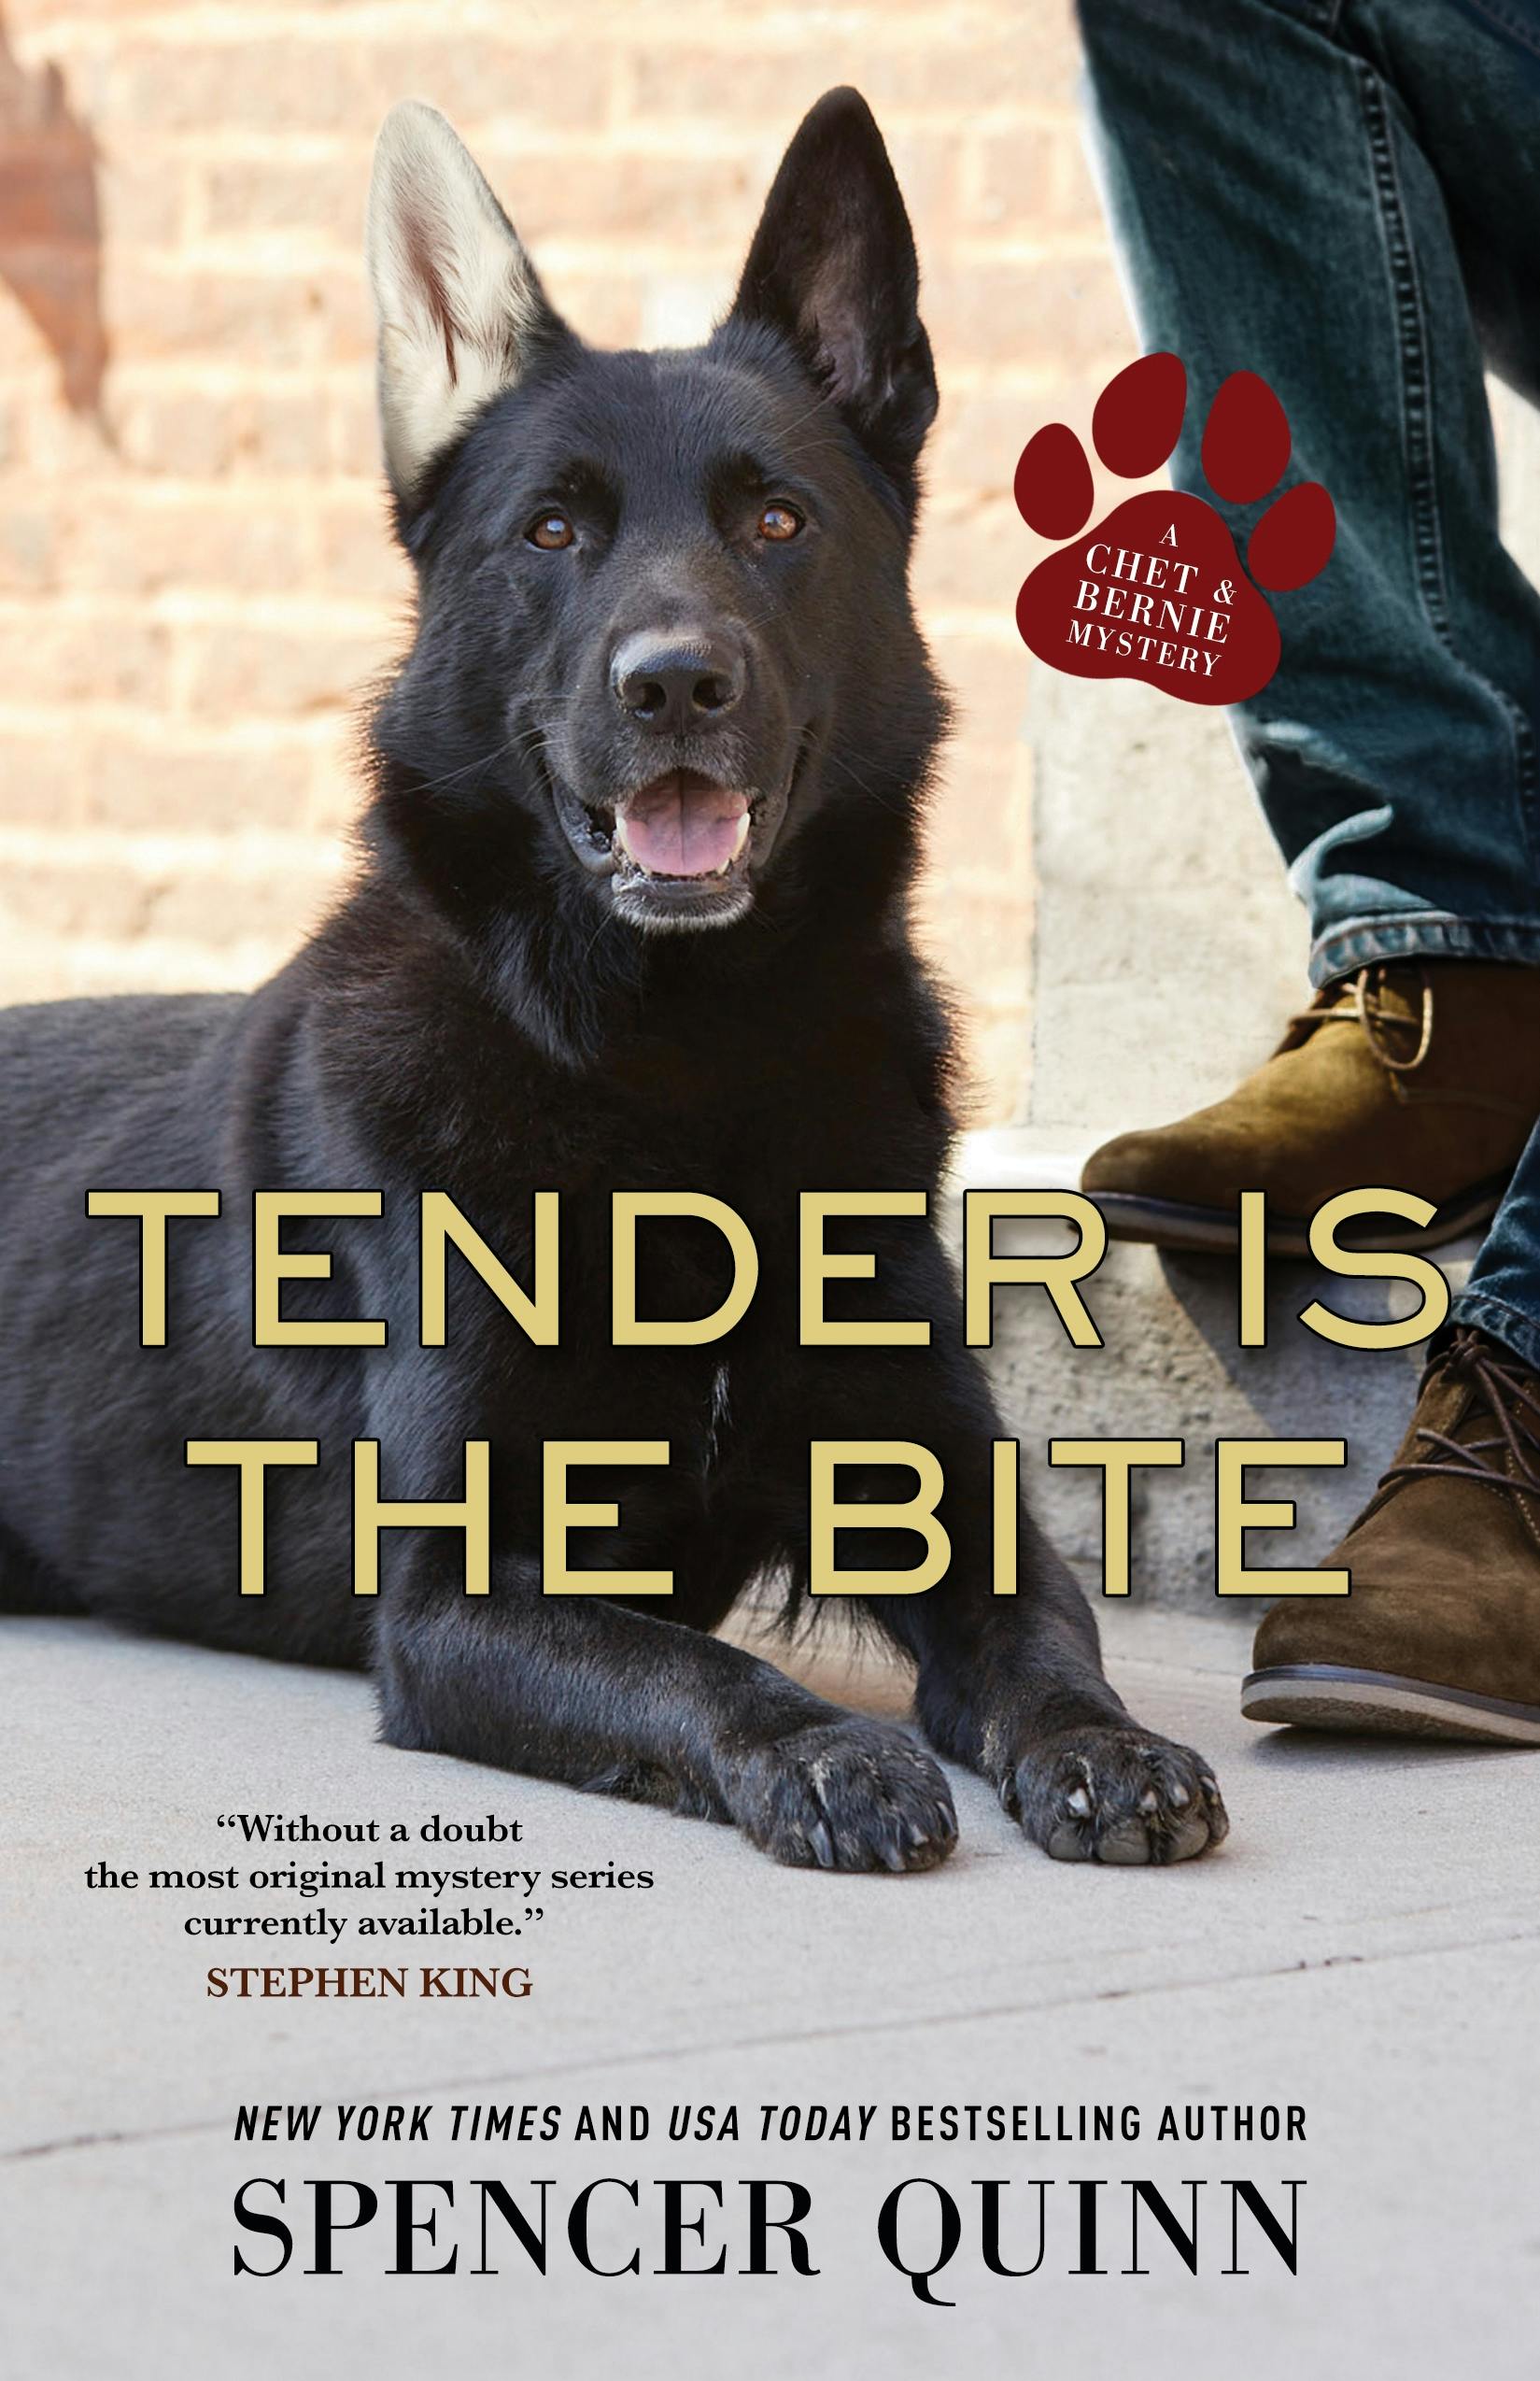 Cover for the book titled as: Tender Is the Bite